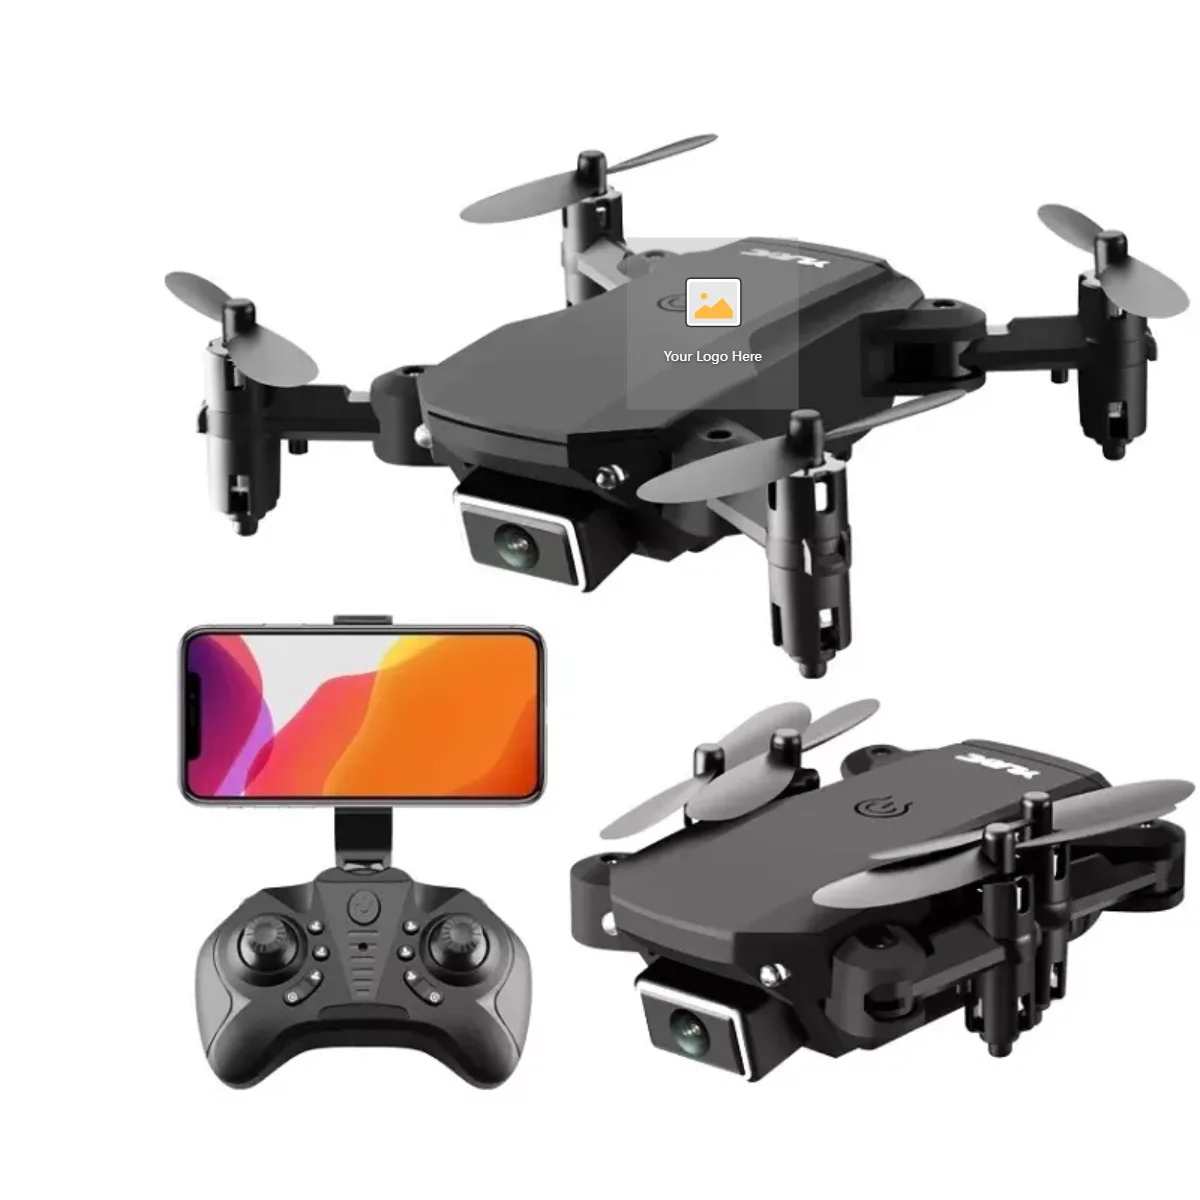 

4 Channel GPS Altitude Mode 5.8GHz Transmitter 1080P HD Camera RC Quadcopter RTF HUBSAN H501S X4 Drone